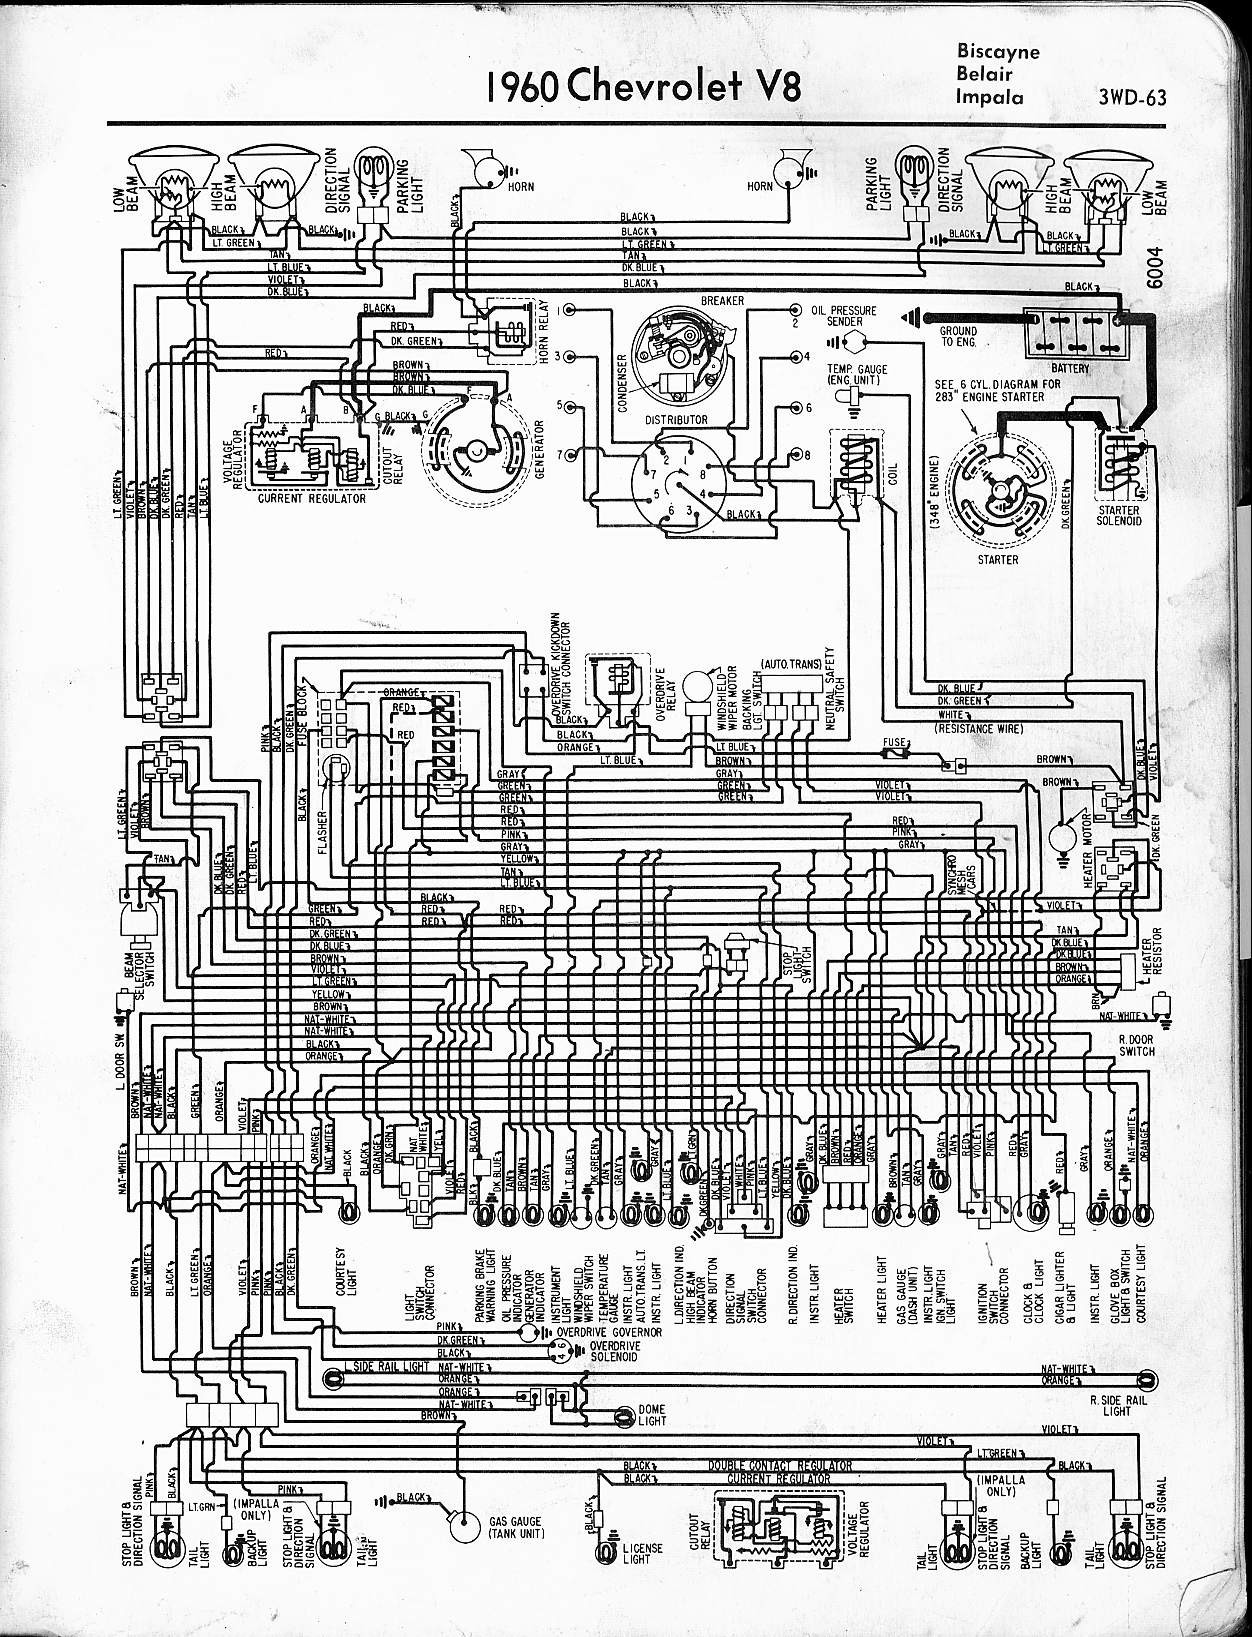 How To Wire A Fuse Box Diagram List 1970 Chevelle Fuse Box Diagram Lovely El Camino Wiring Diagram